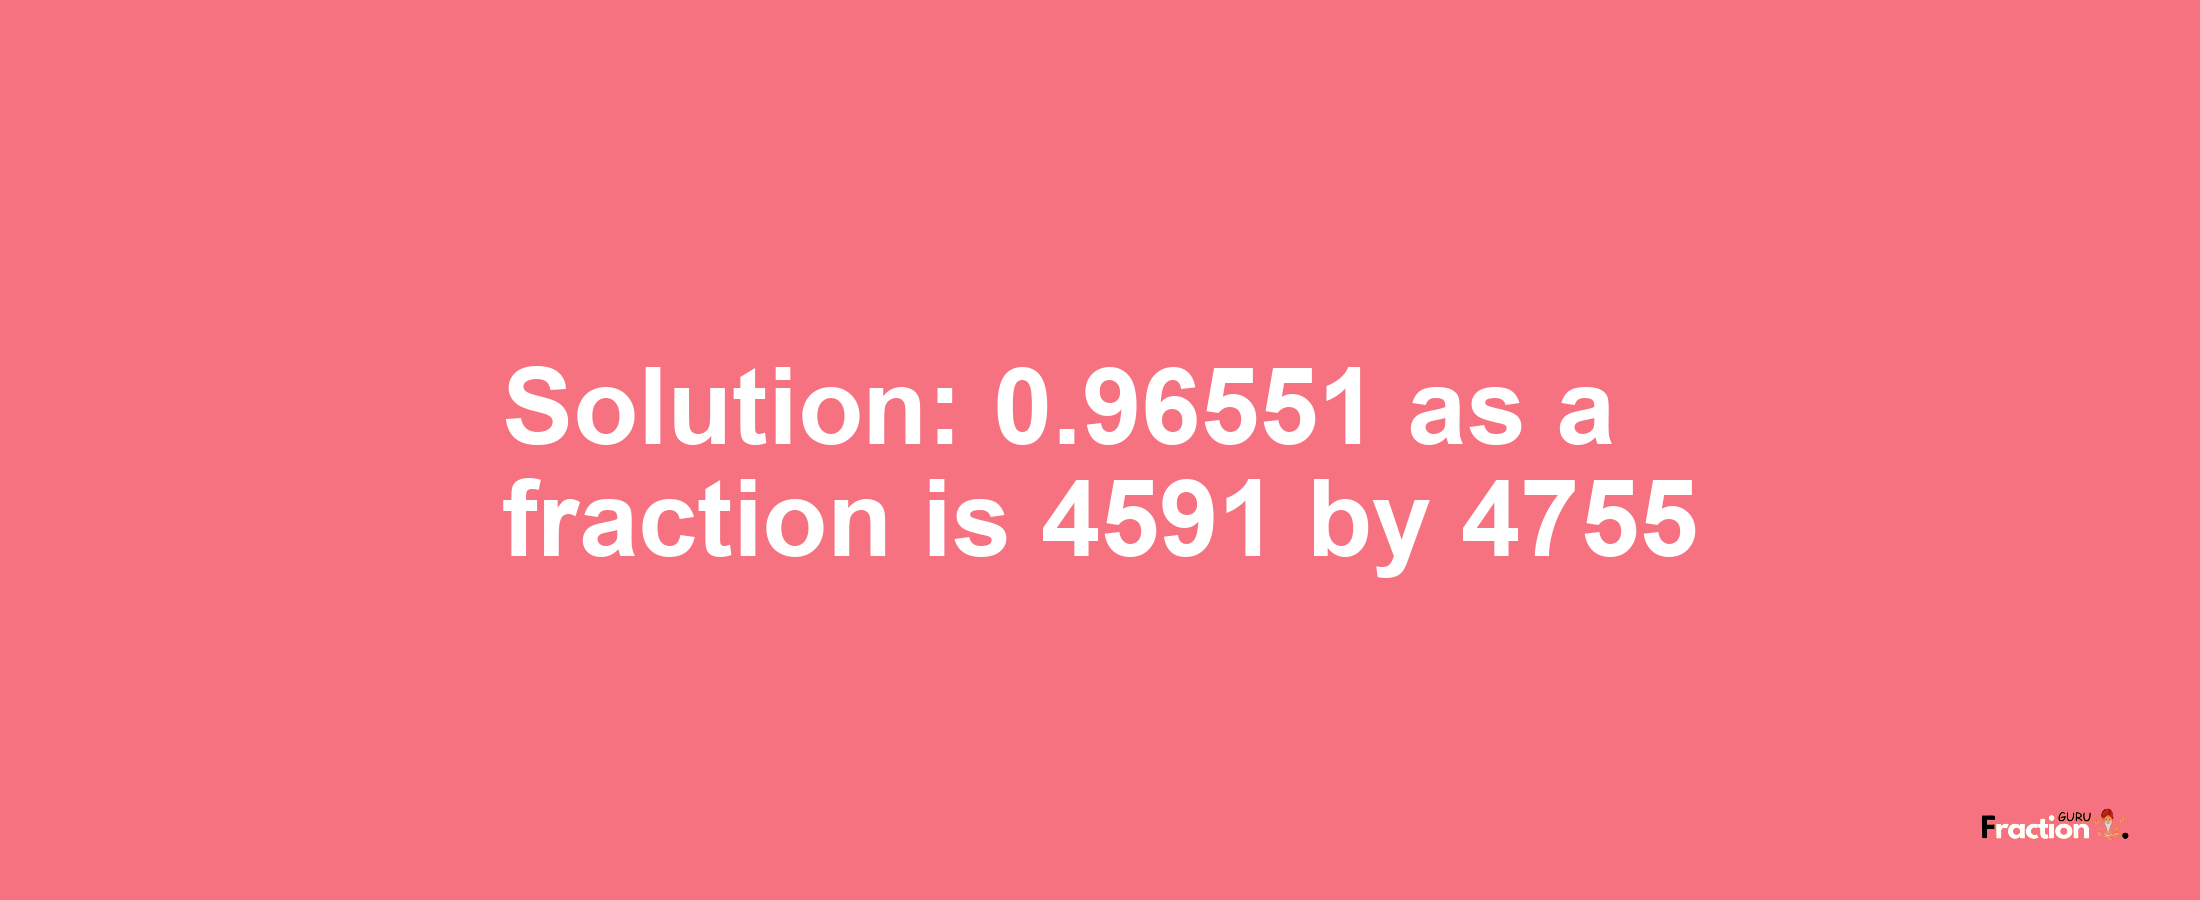 Solution:0.96551 as a fraction is 4591/4755